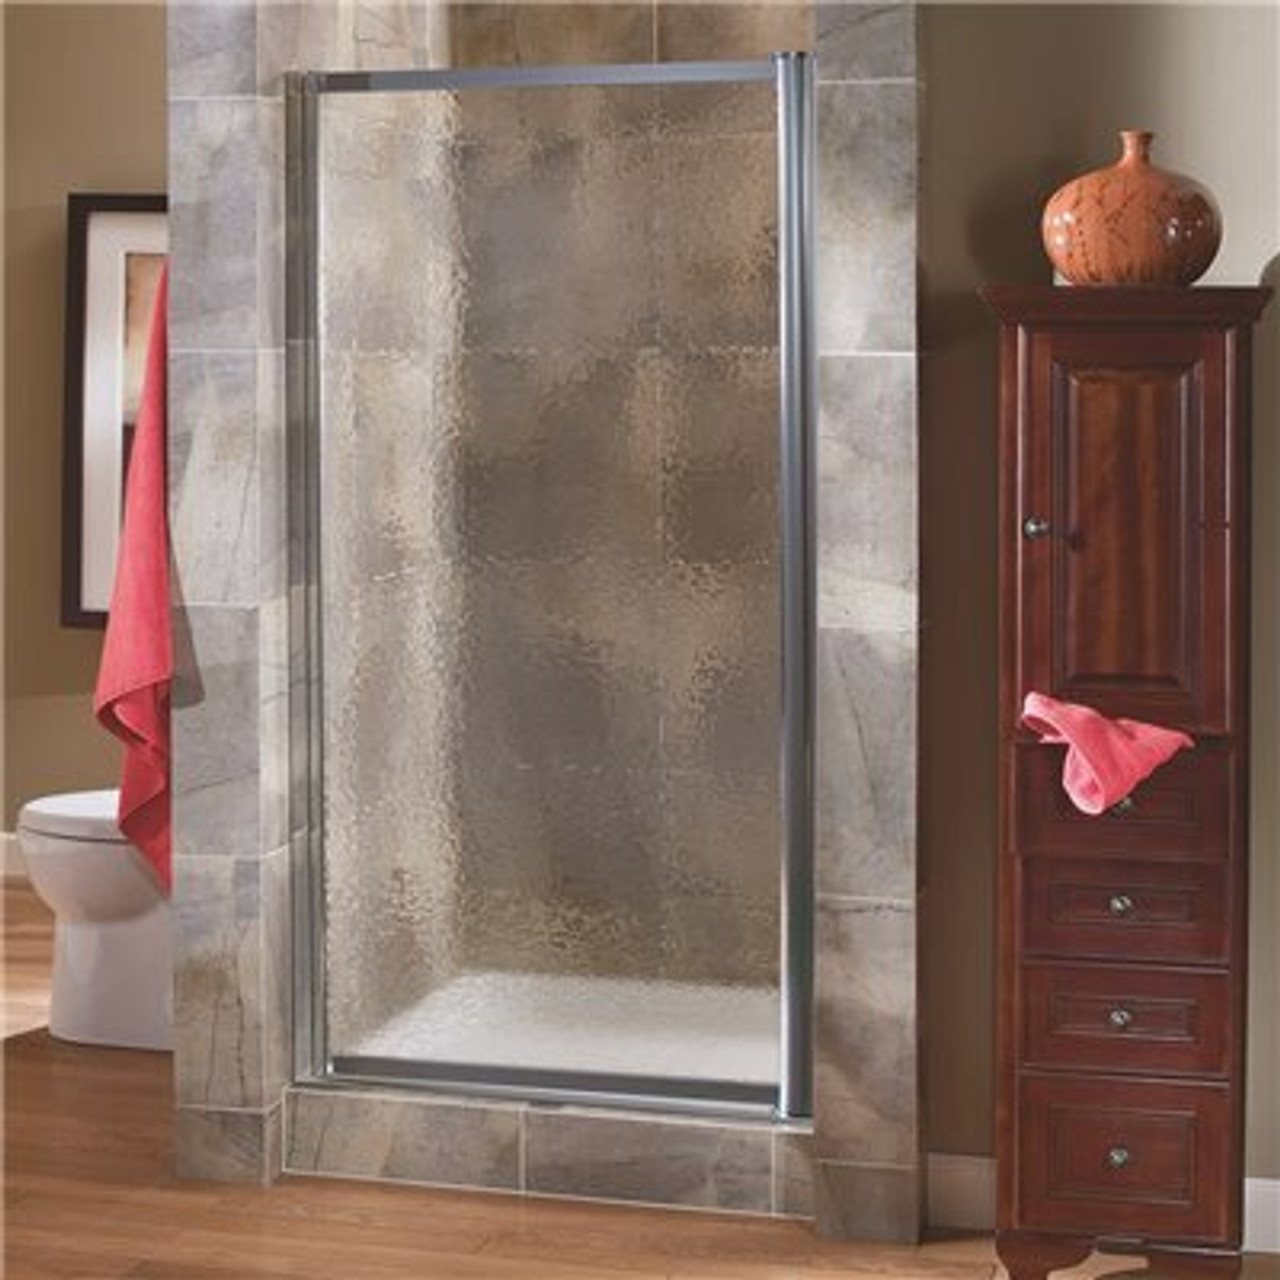 Foremost Tides 25 In. To 27 In. X 65 In. Framed Pivot Shower Door In Silver With Obscure Glass